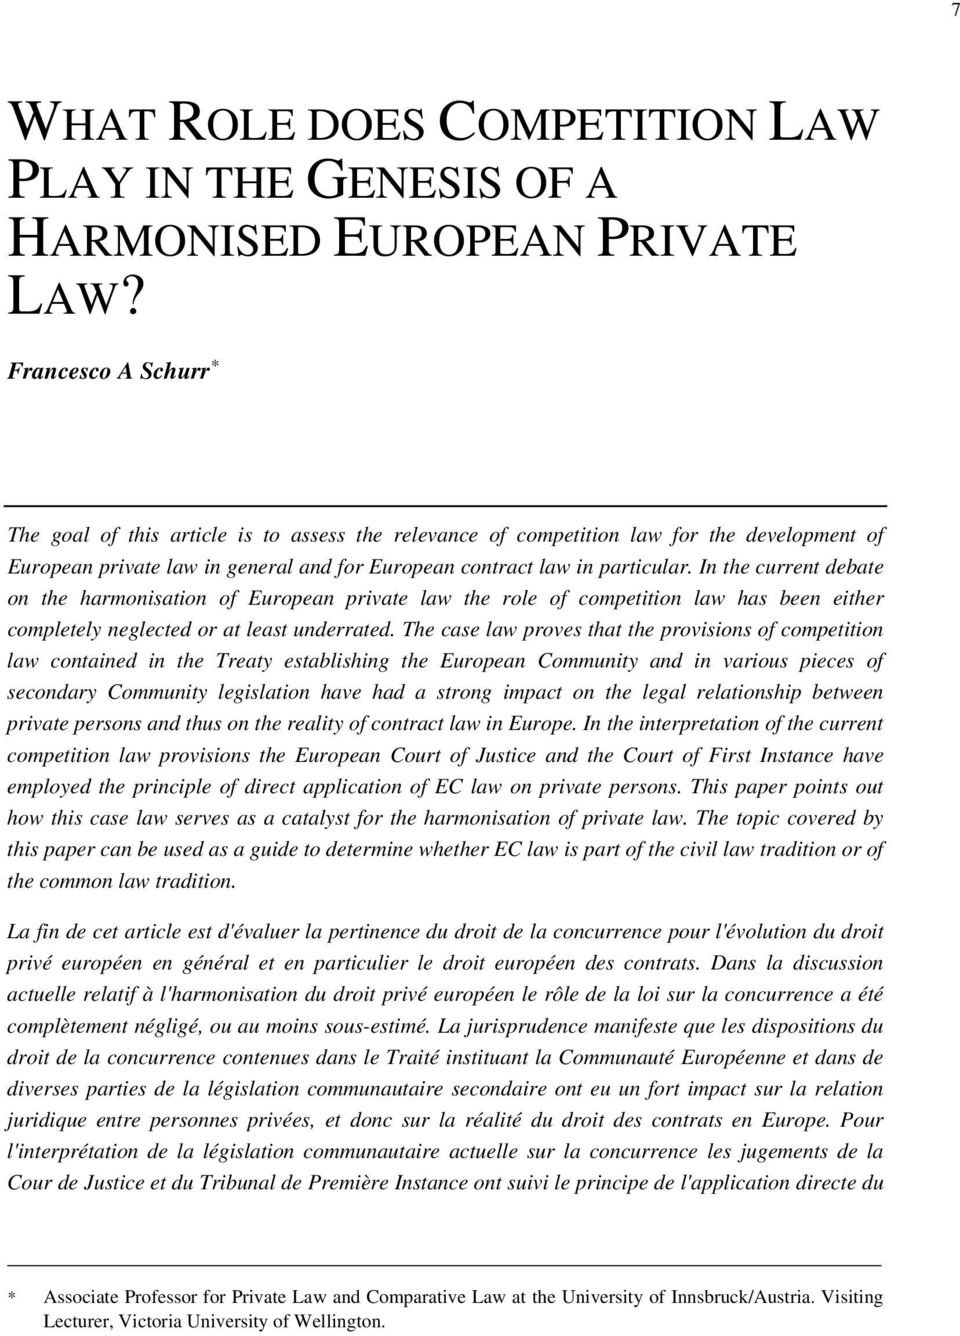 In the current debate on the harmonisation of European private law the role of competition law has been either completely neglected or at least underrated.